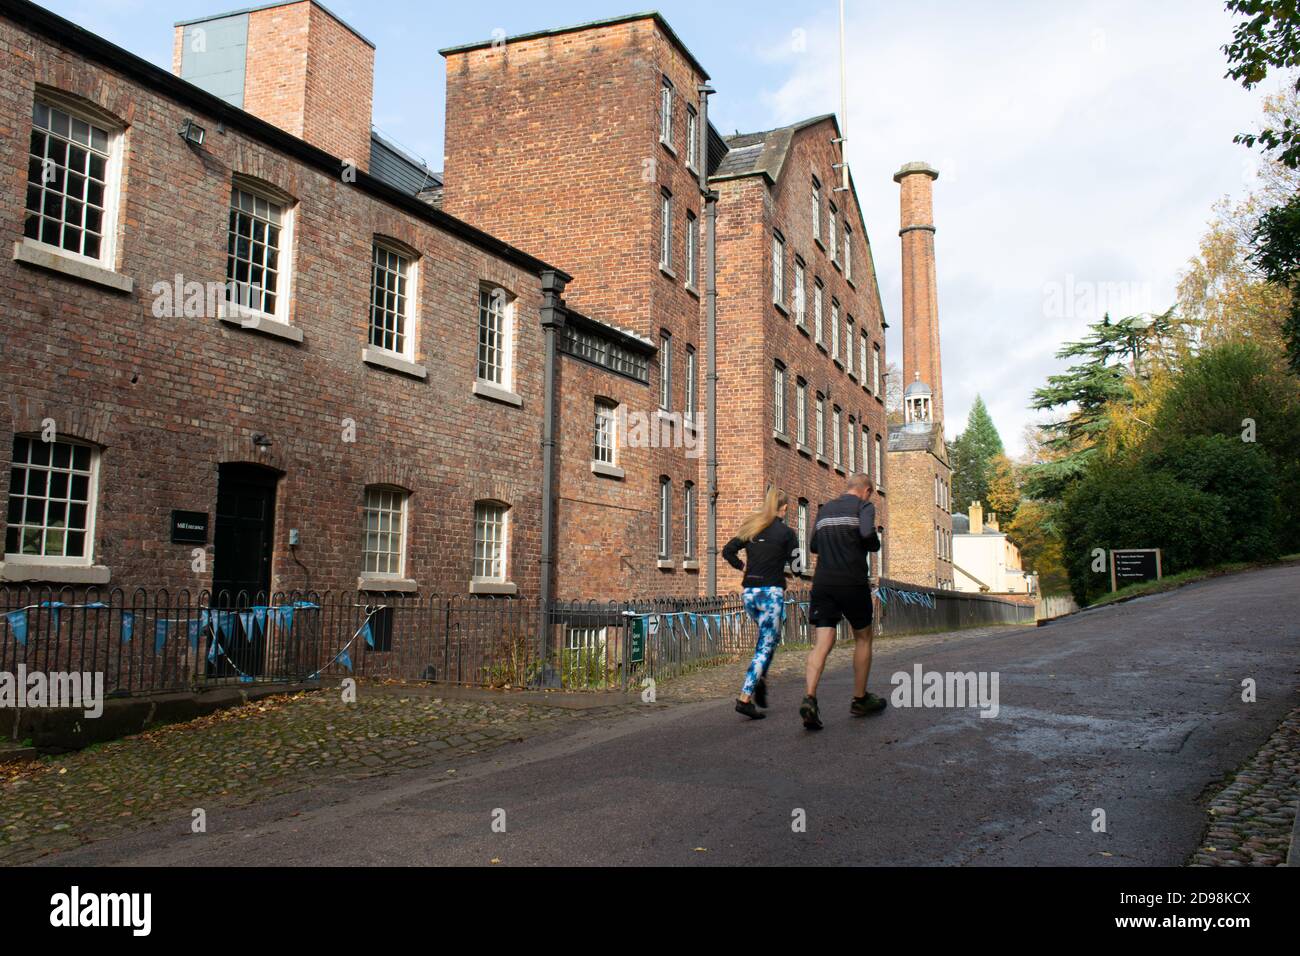 Quarry bank Mill historic cotton mill 1784 , Styal, Cheshire, UK. Autumn day with couple jogging up hill Stock Photo